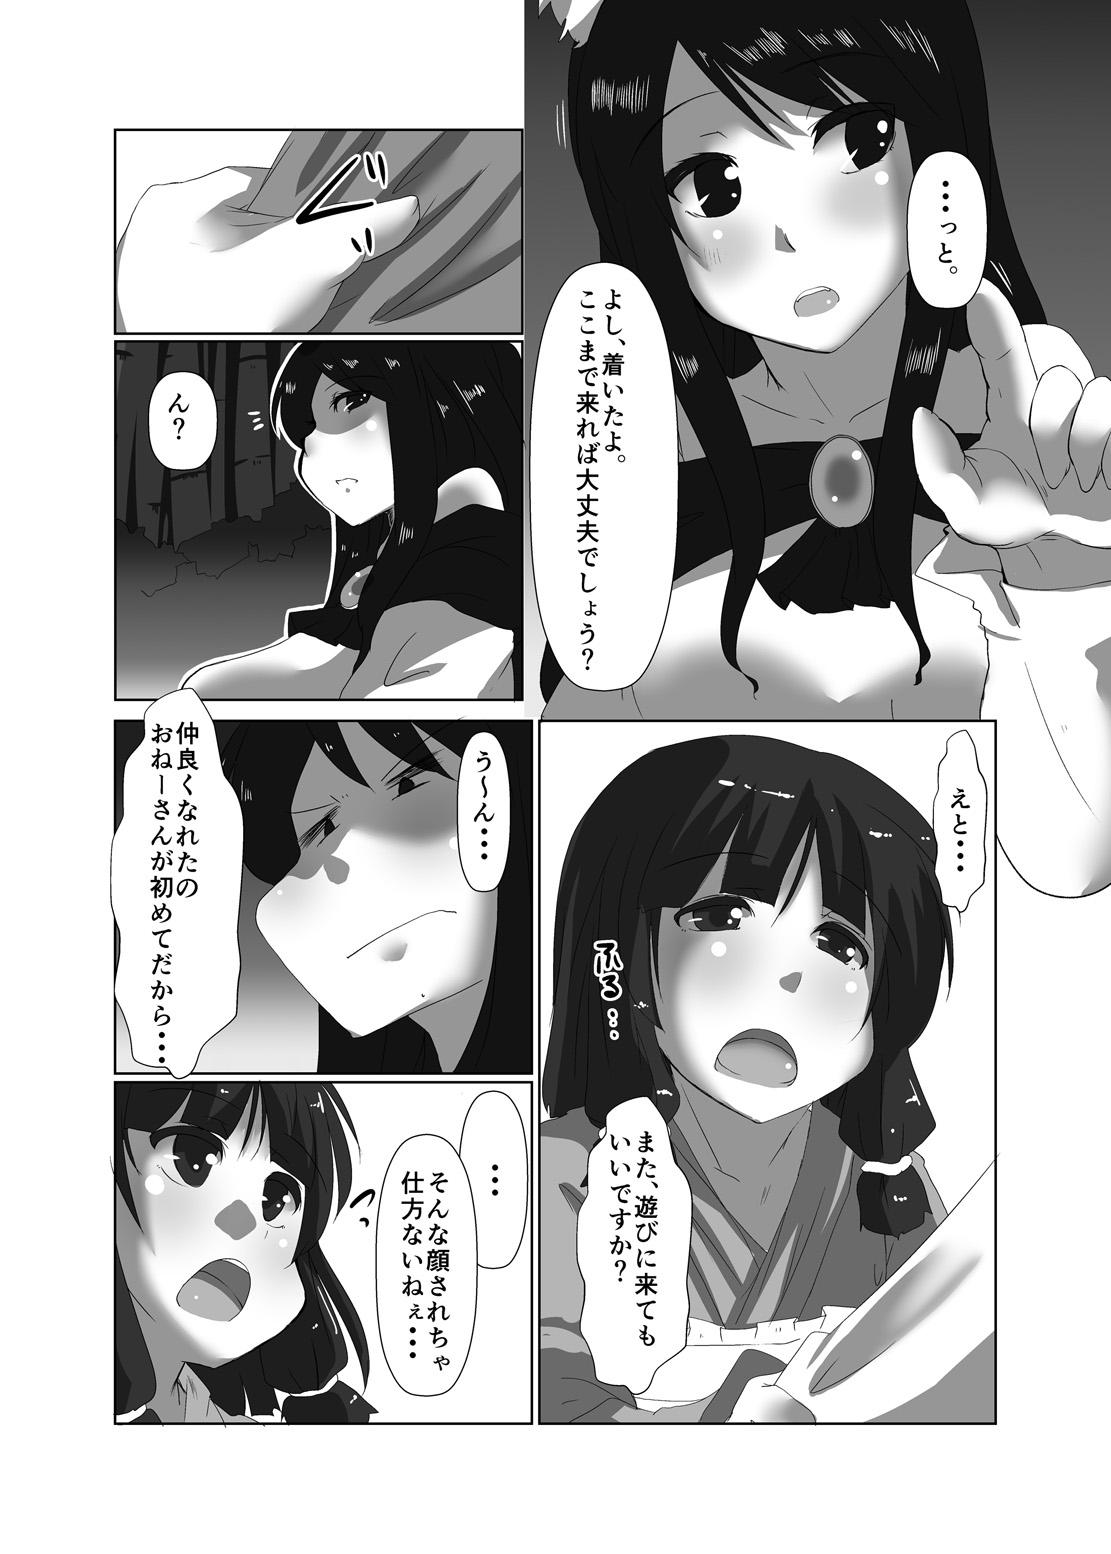 Lolicon ELonely Wolf no Onee-san - Touhou project Collar - Page 10